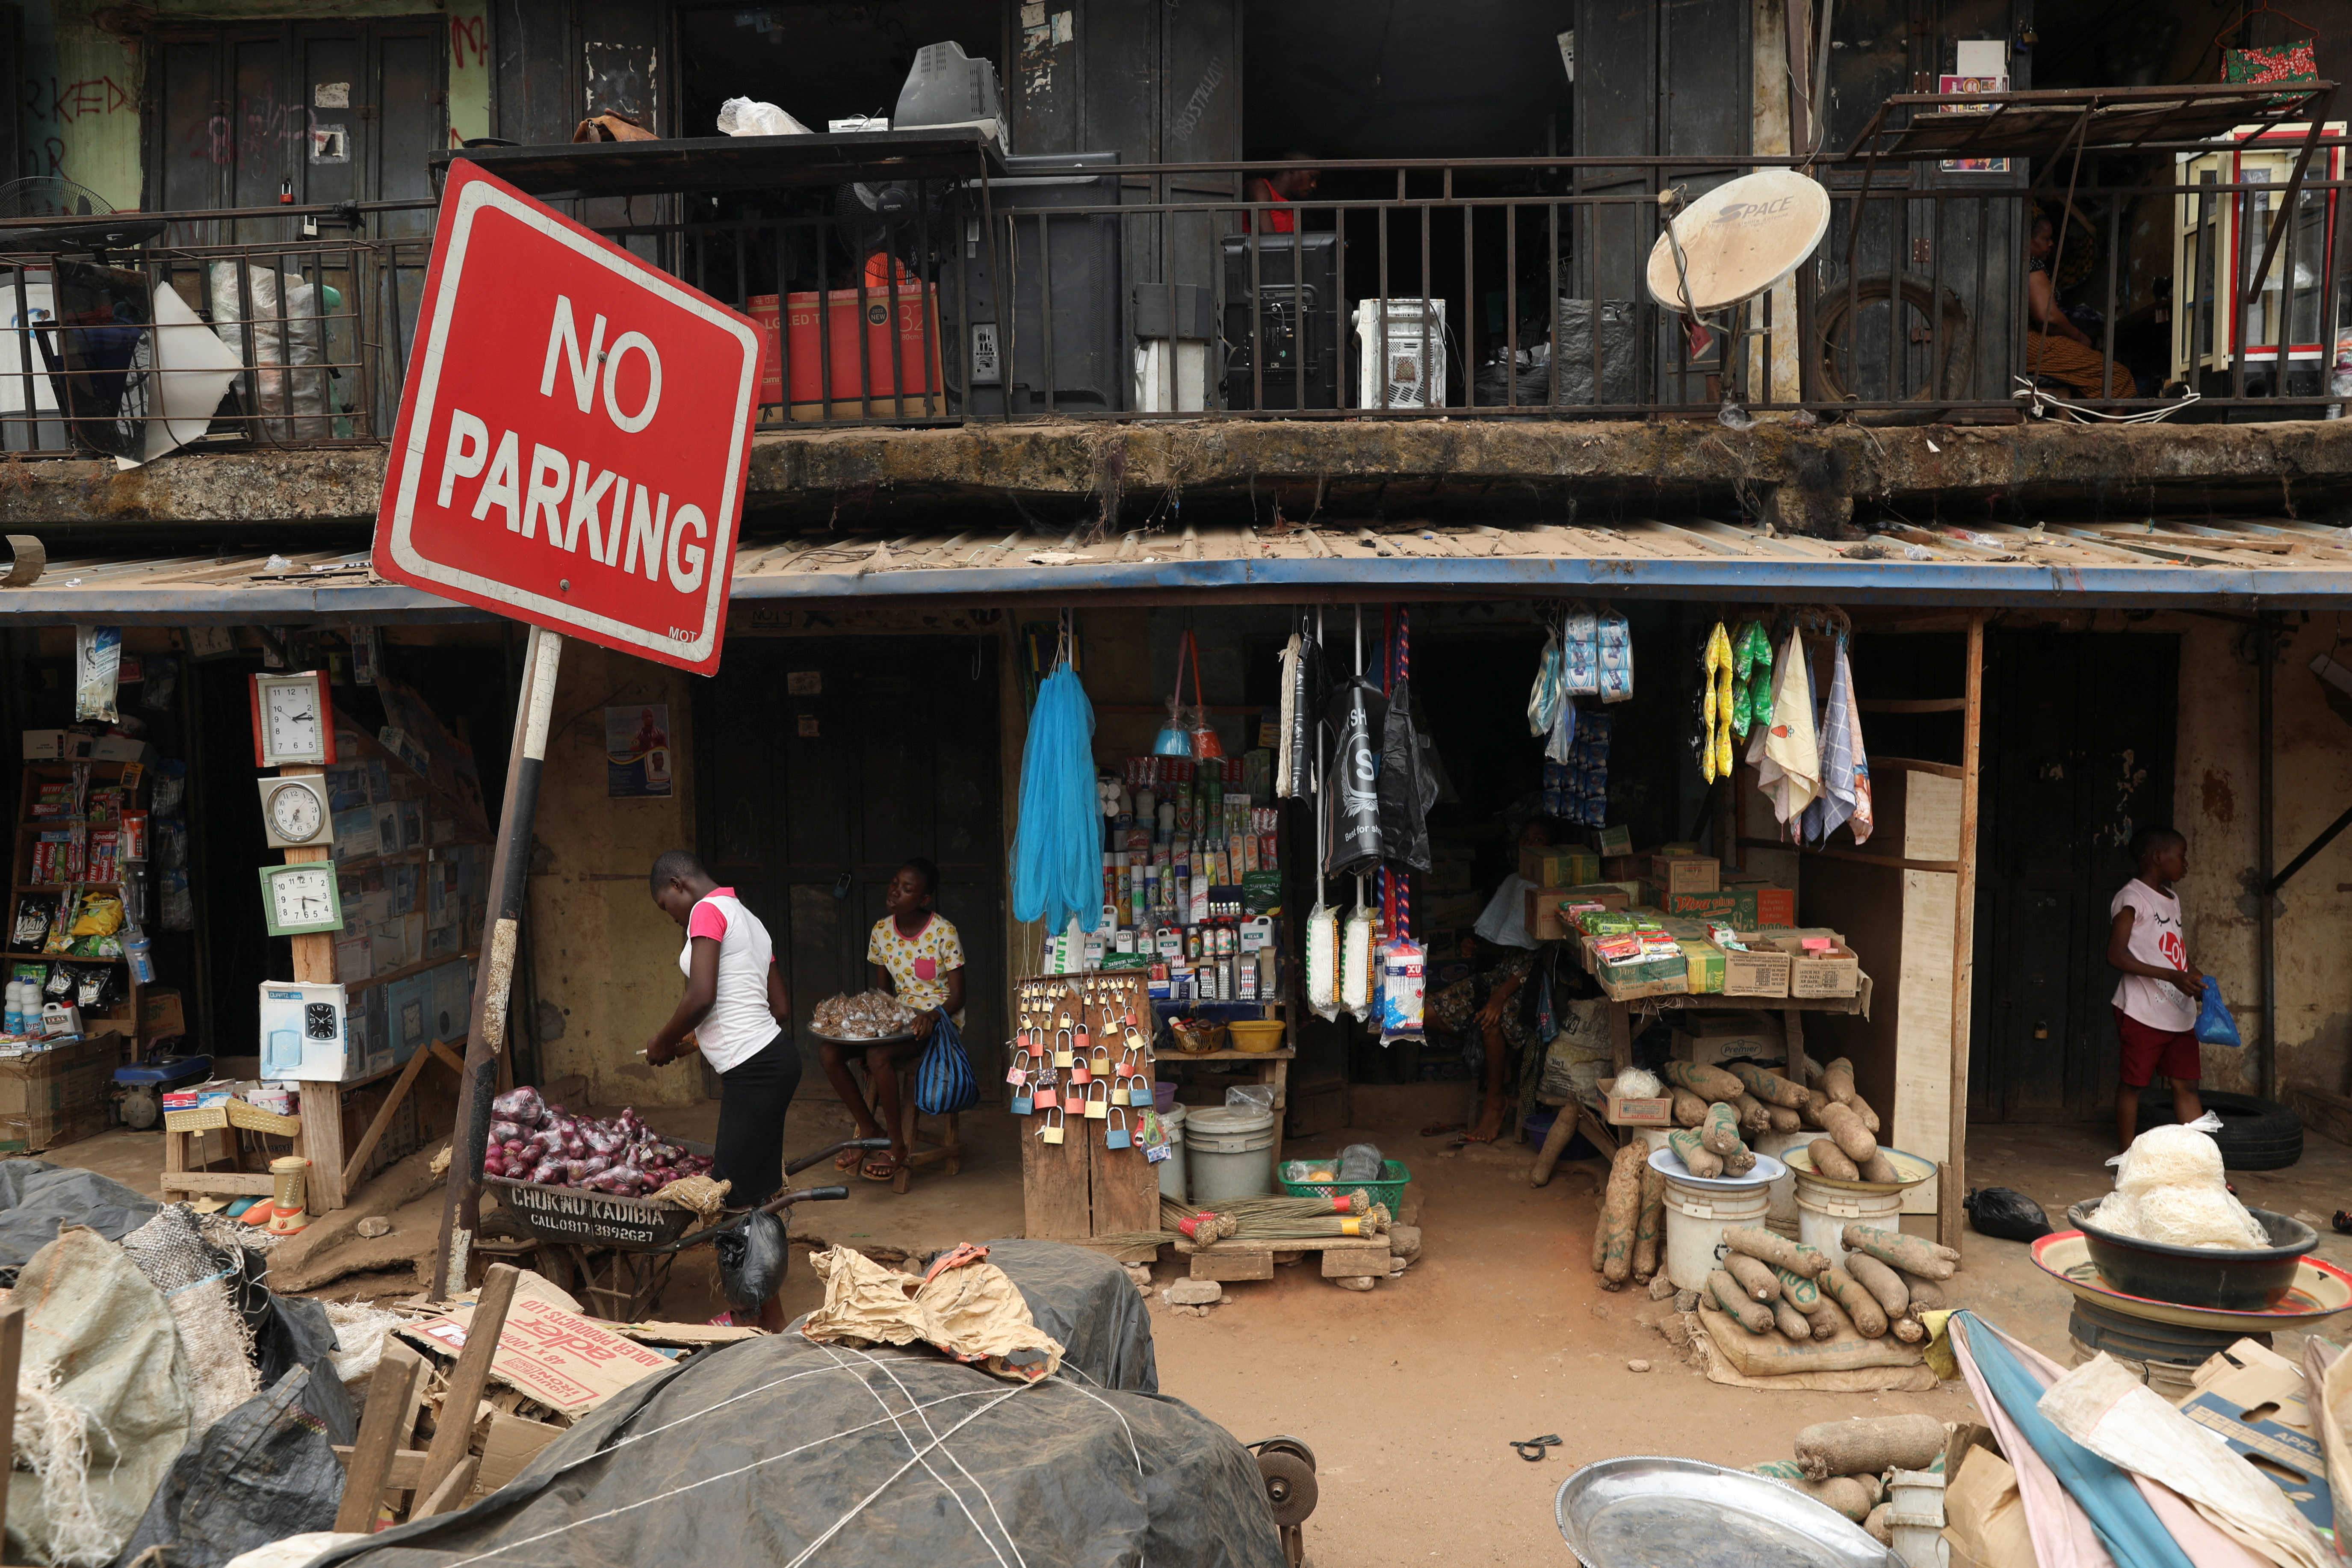 A No Parking road sign is seen in front of a shopping complex in an open market, ahead of Nigeria's Presidential election in Awka